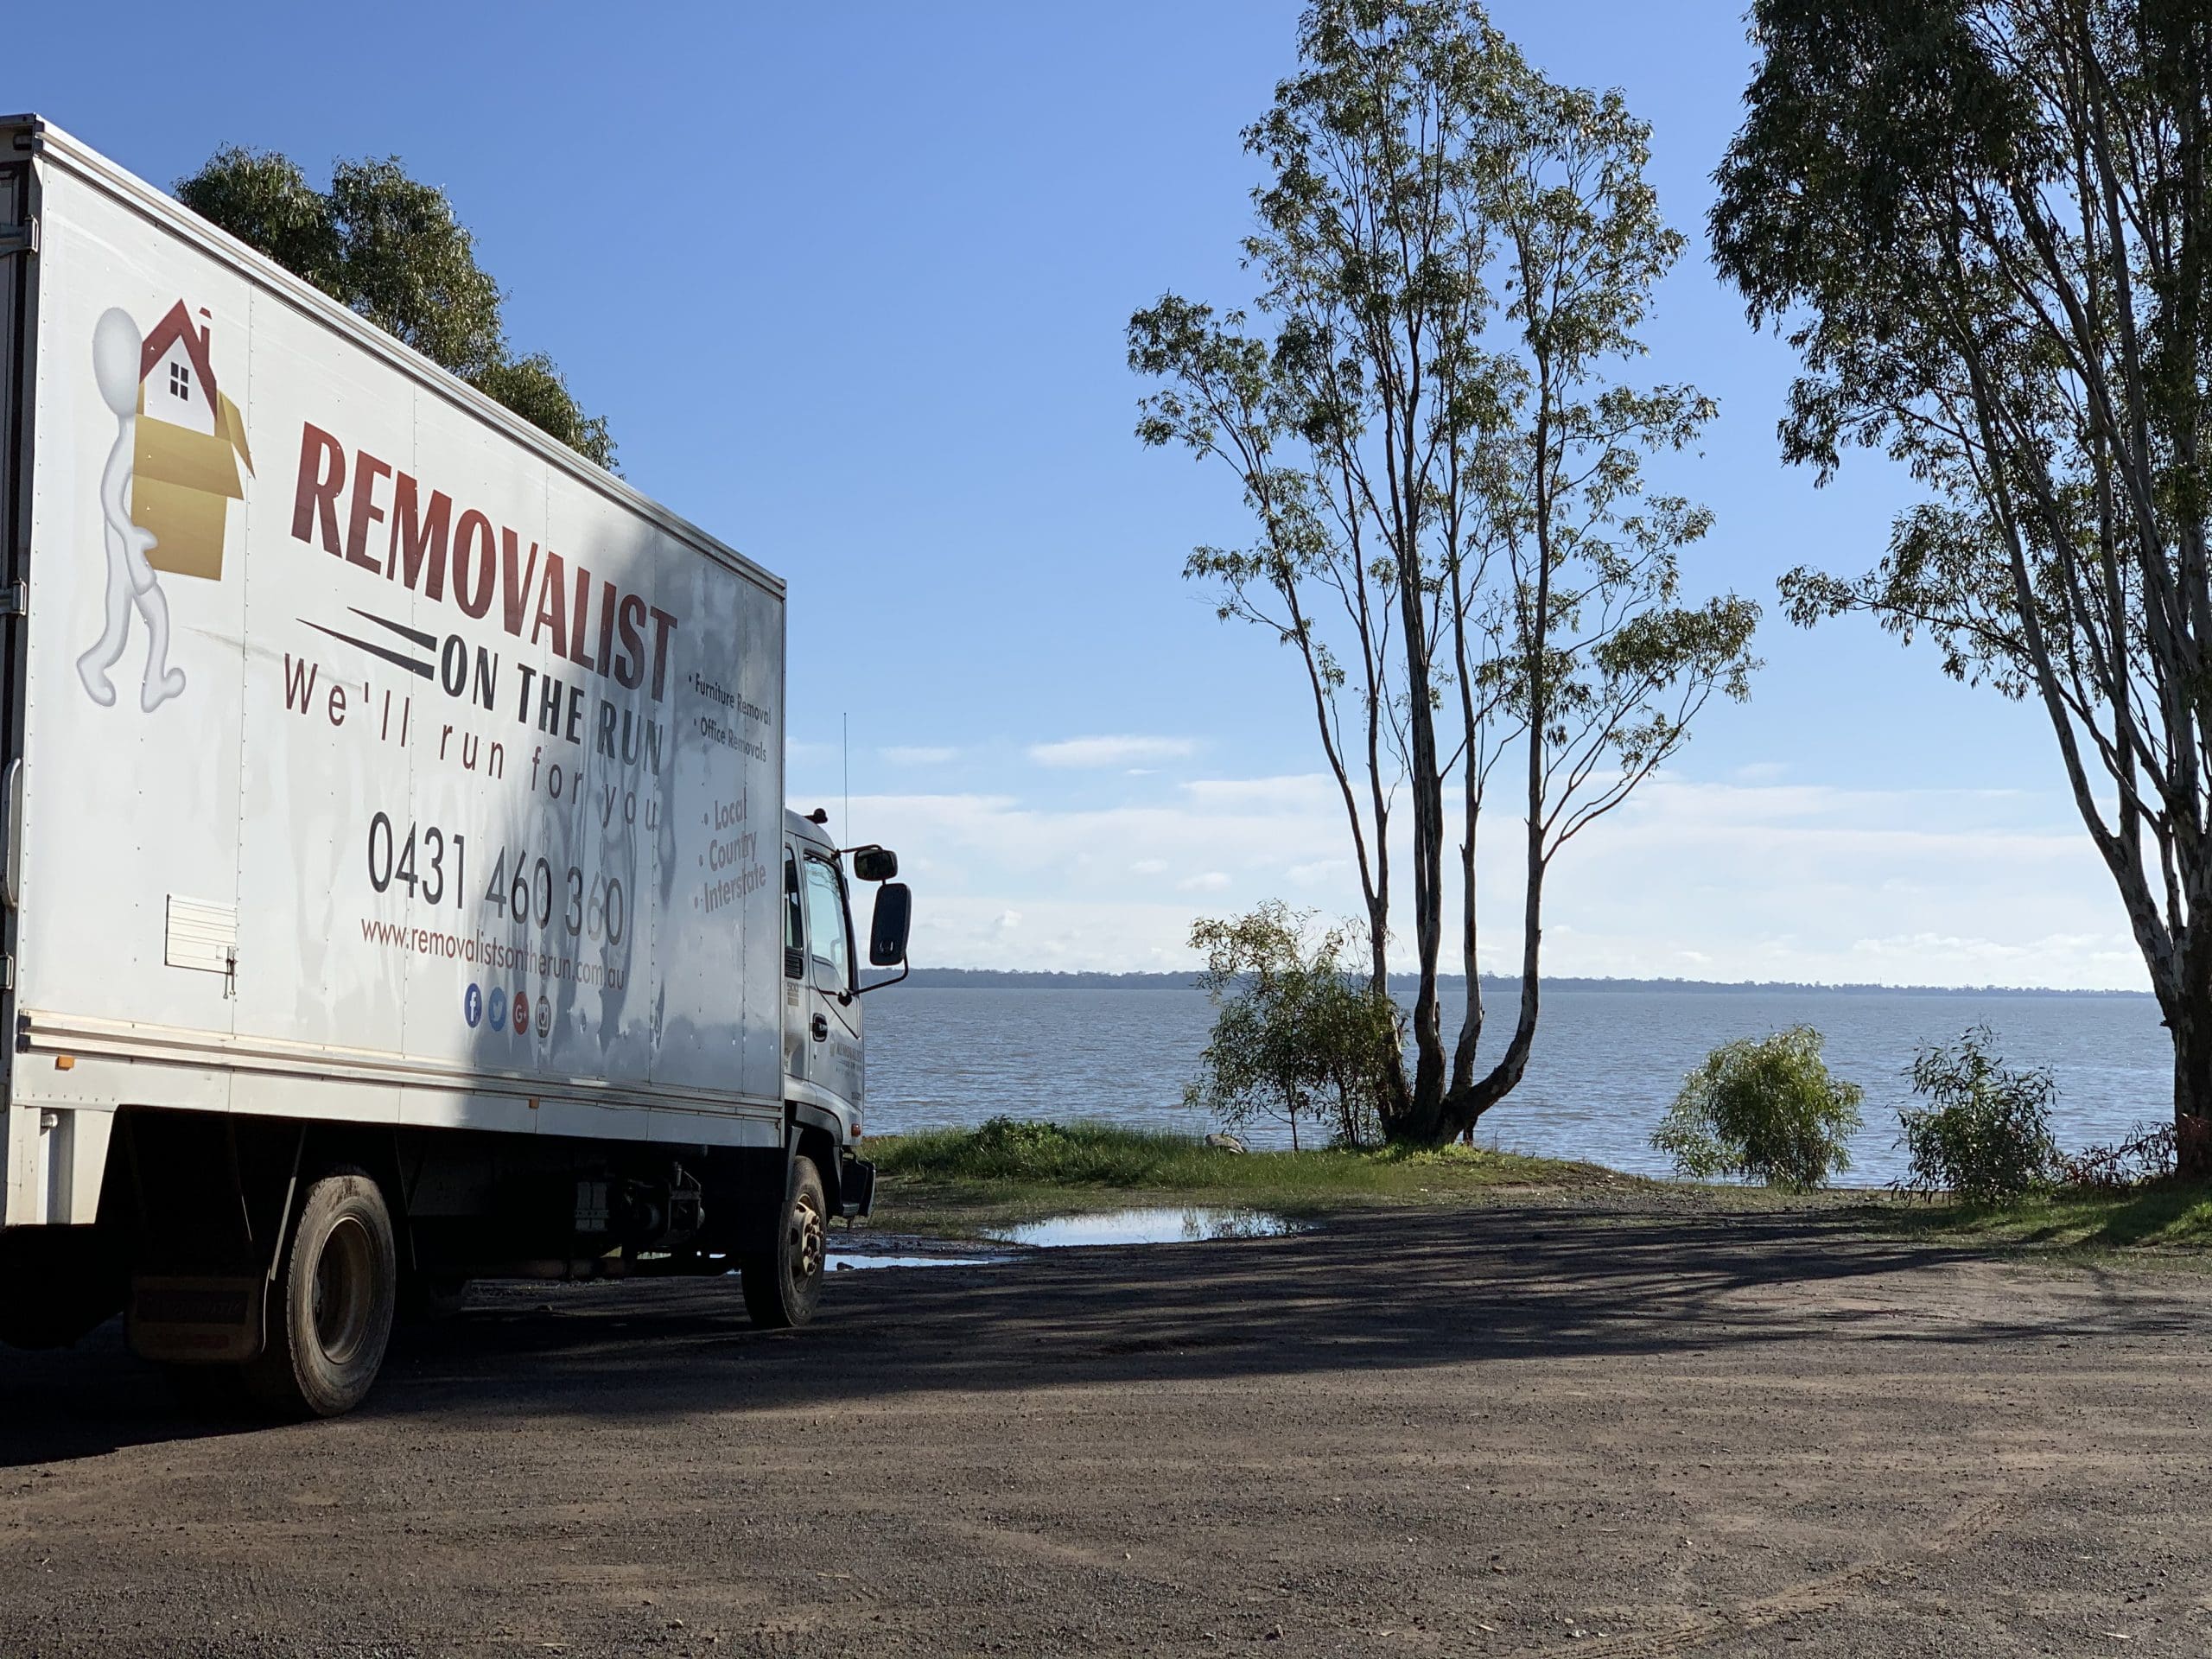 Need to Move in An Emergency During COVID-19? Removalists On the Run Can Help